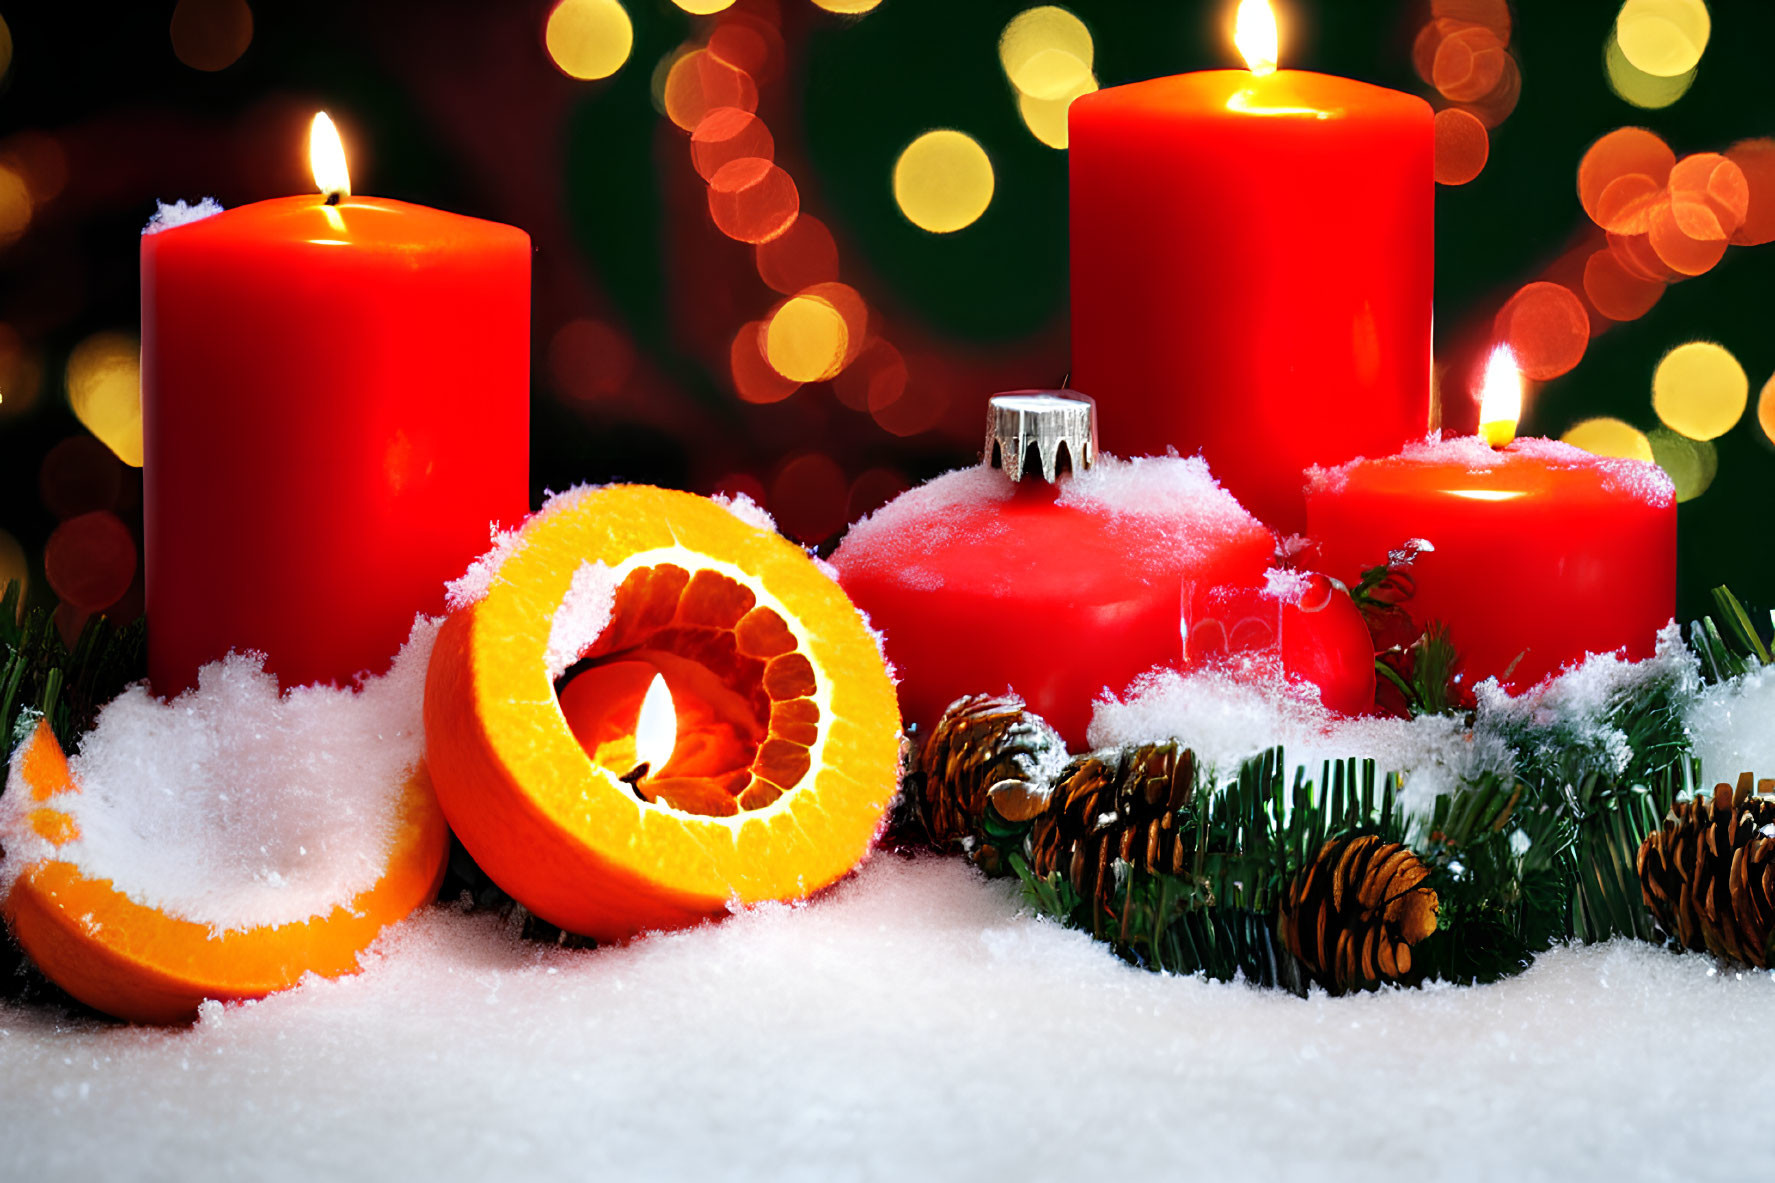 Festive holiday still life with red candles, orange slice, pine cones, and greenery